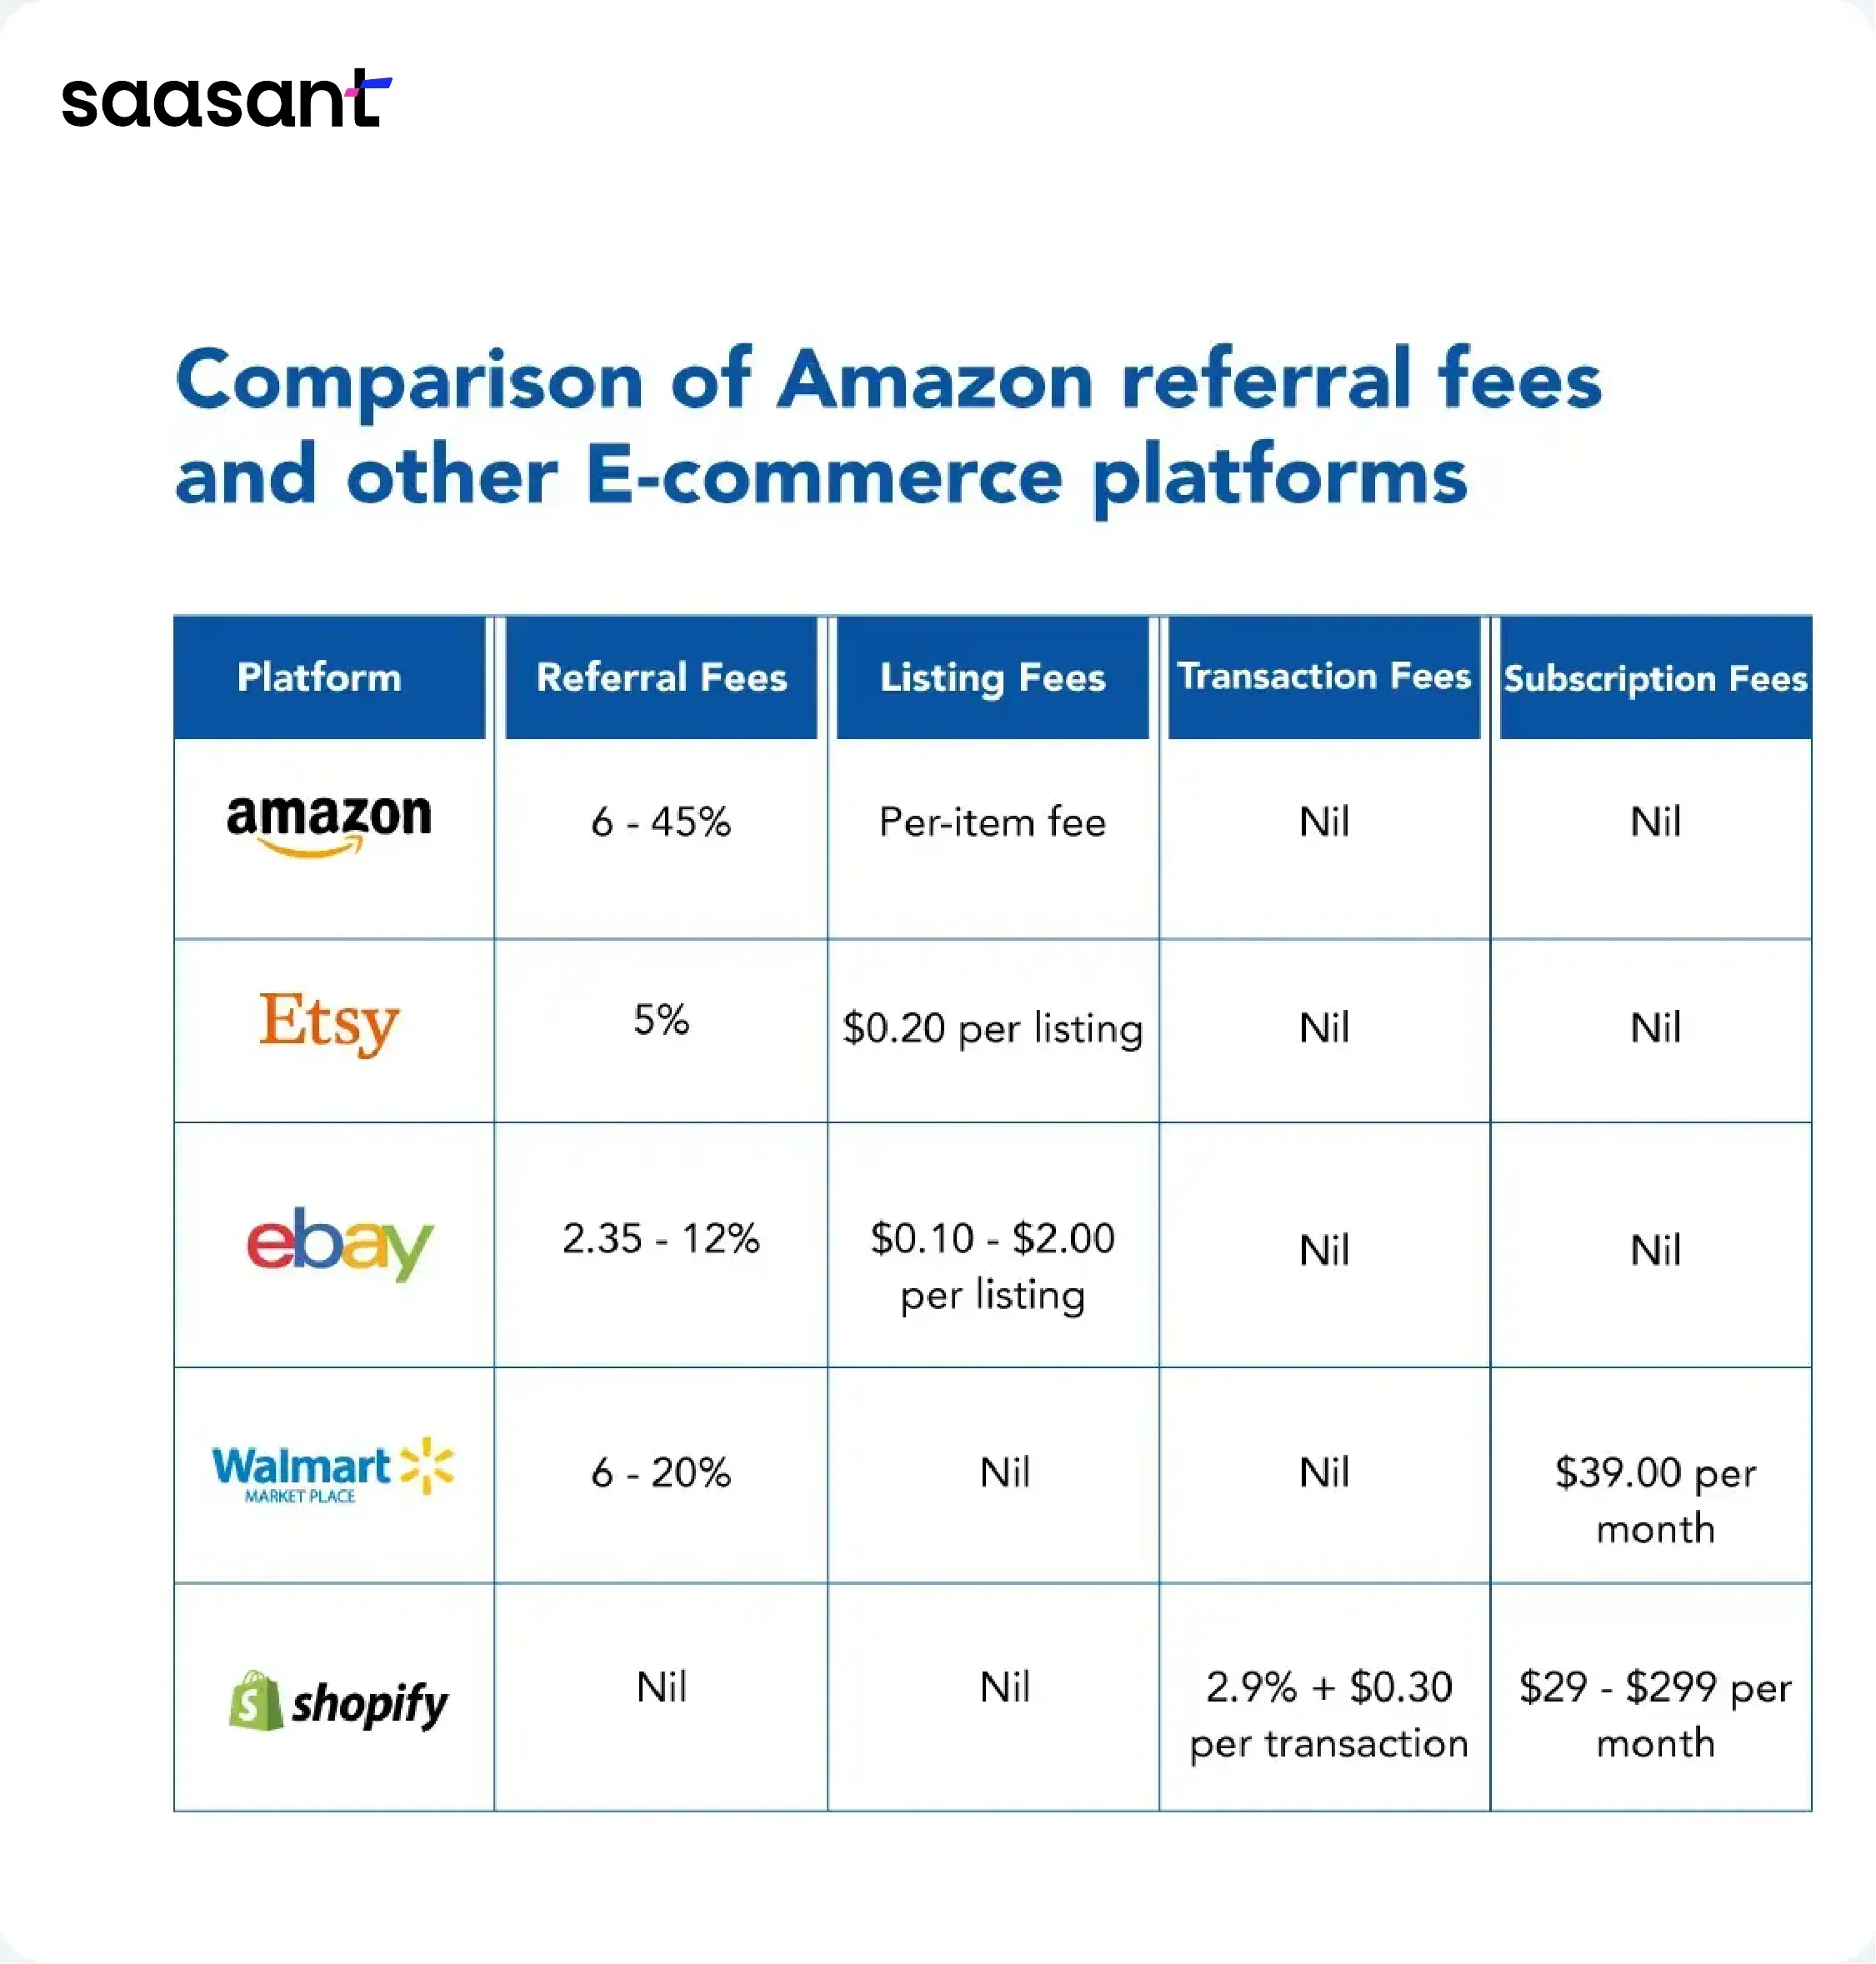 image_Comparision_of_Amazon_referral_fee_and_other_0d5631820a.webp